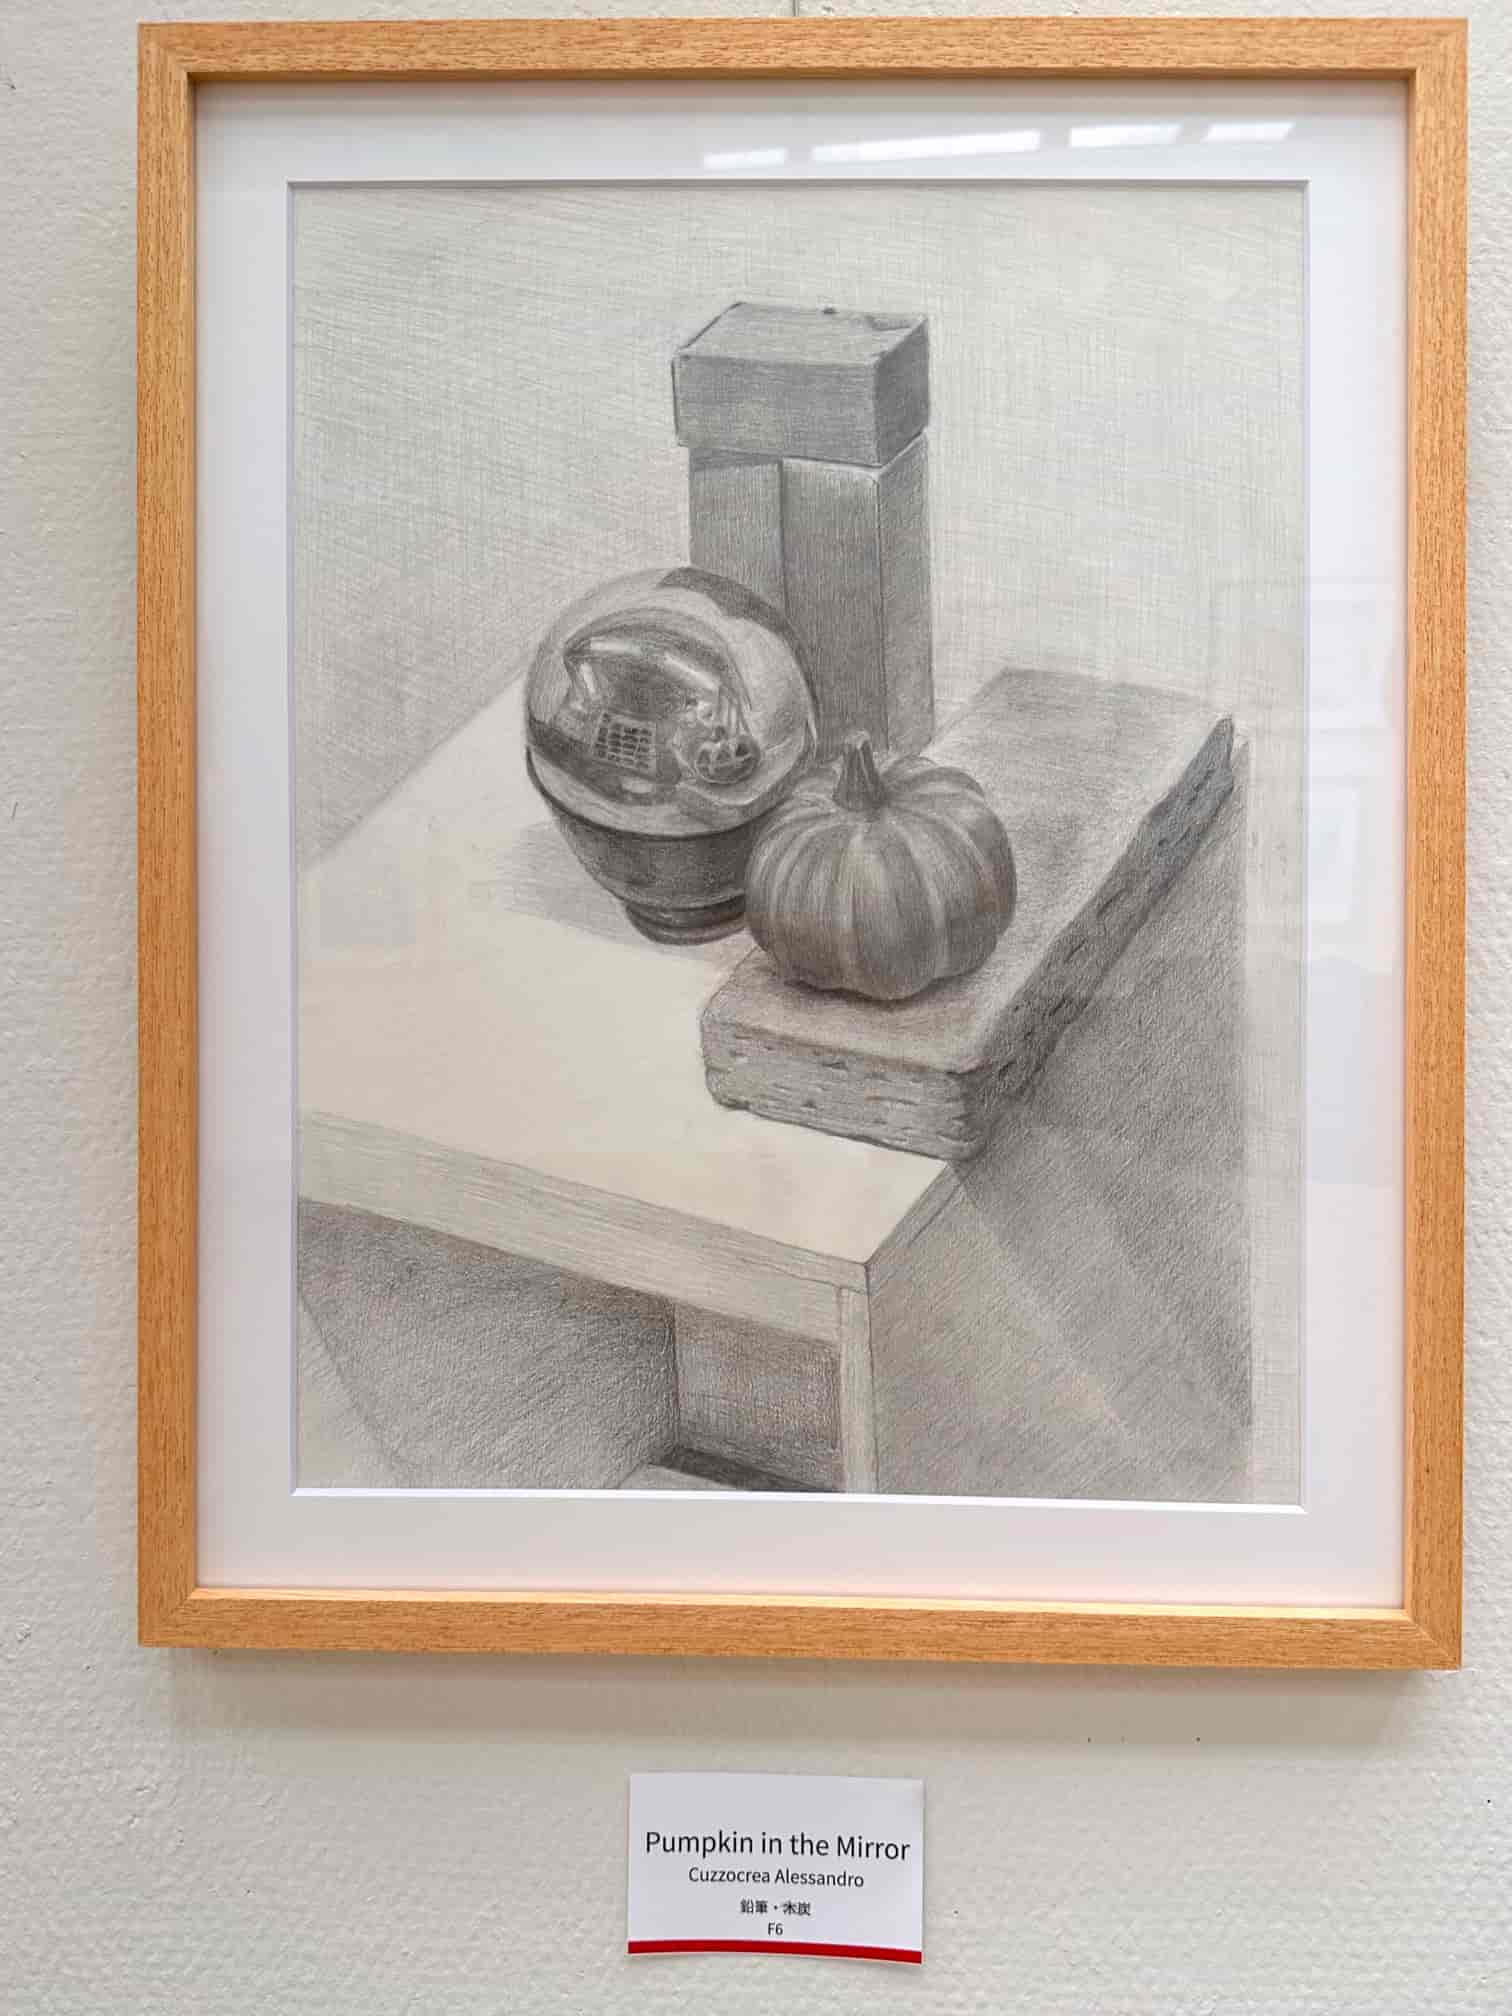 Graphite still life drawing titled 'Pumpkin in the Mirror' by Alessandro Cuzzocrea, displayed at an art exhibition